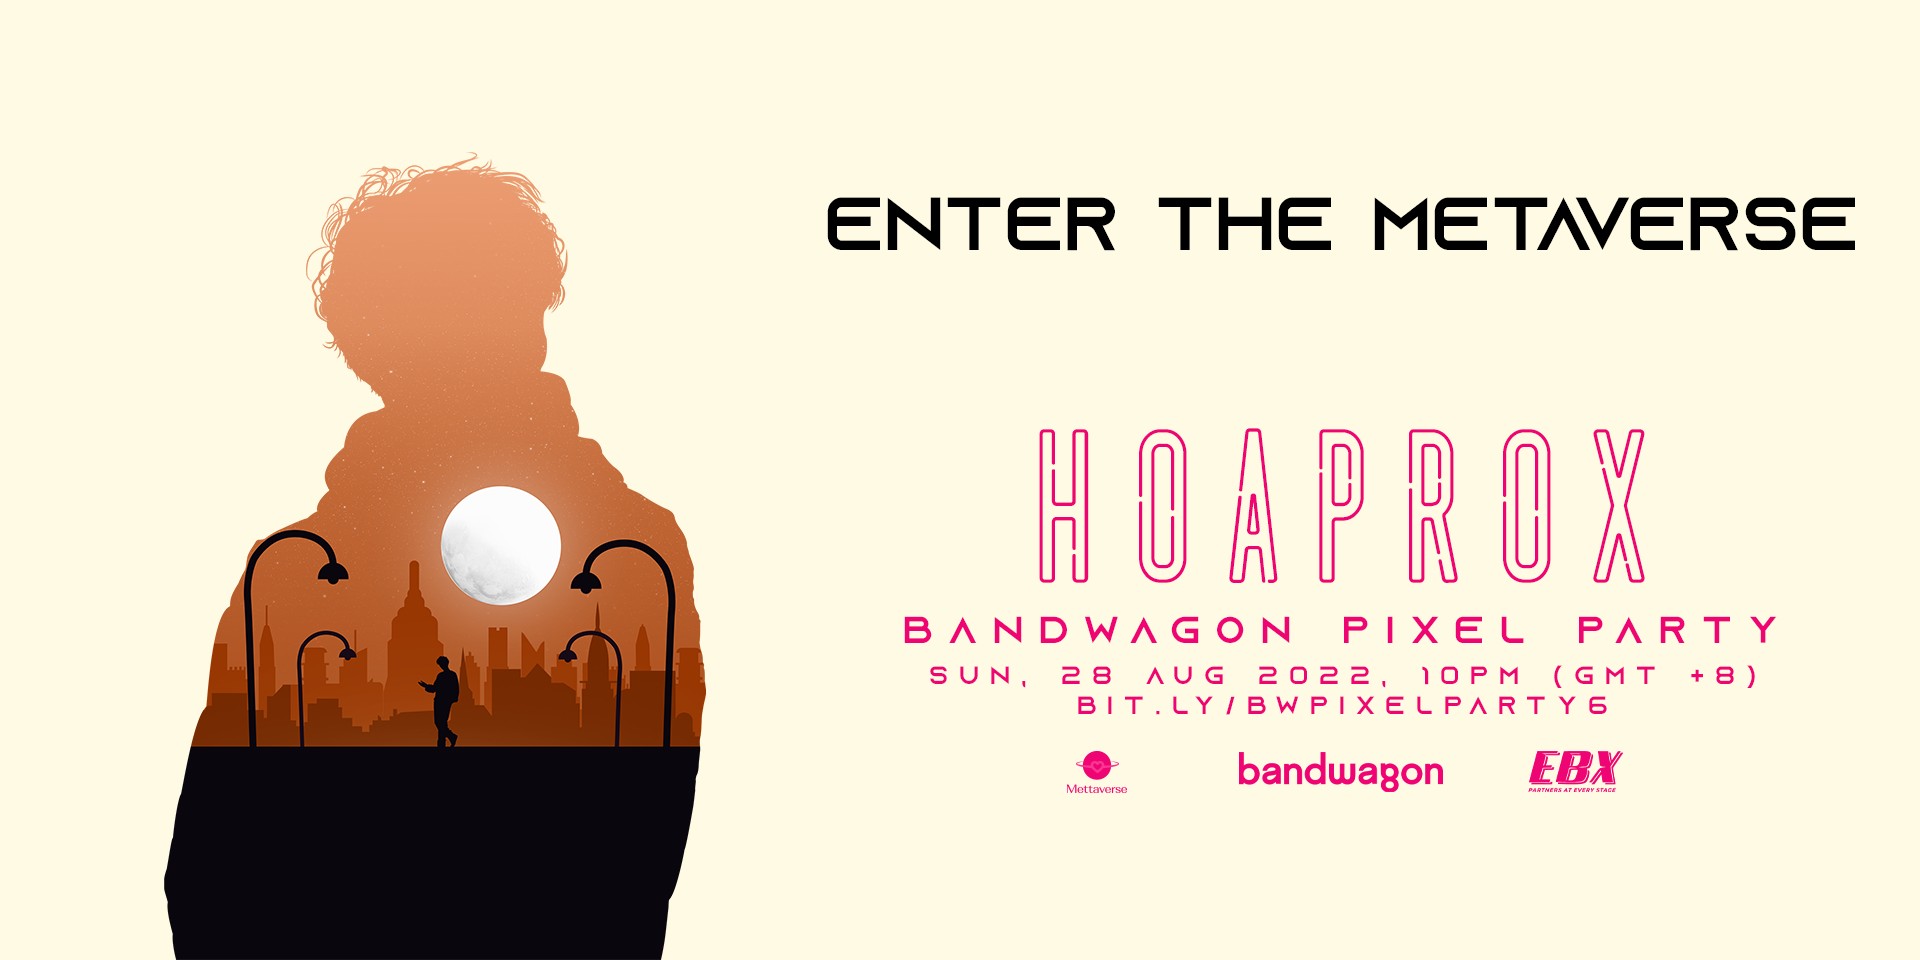 Hoaprox to hold concert in the metaverse at Bandwagon Pixel Party, here’s how to join
